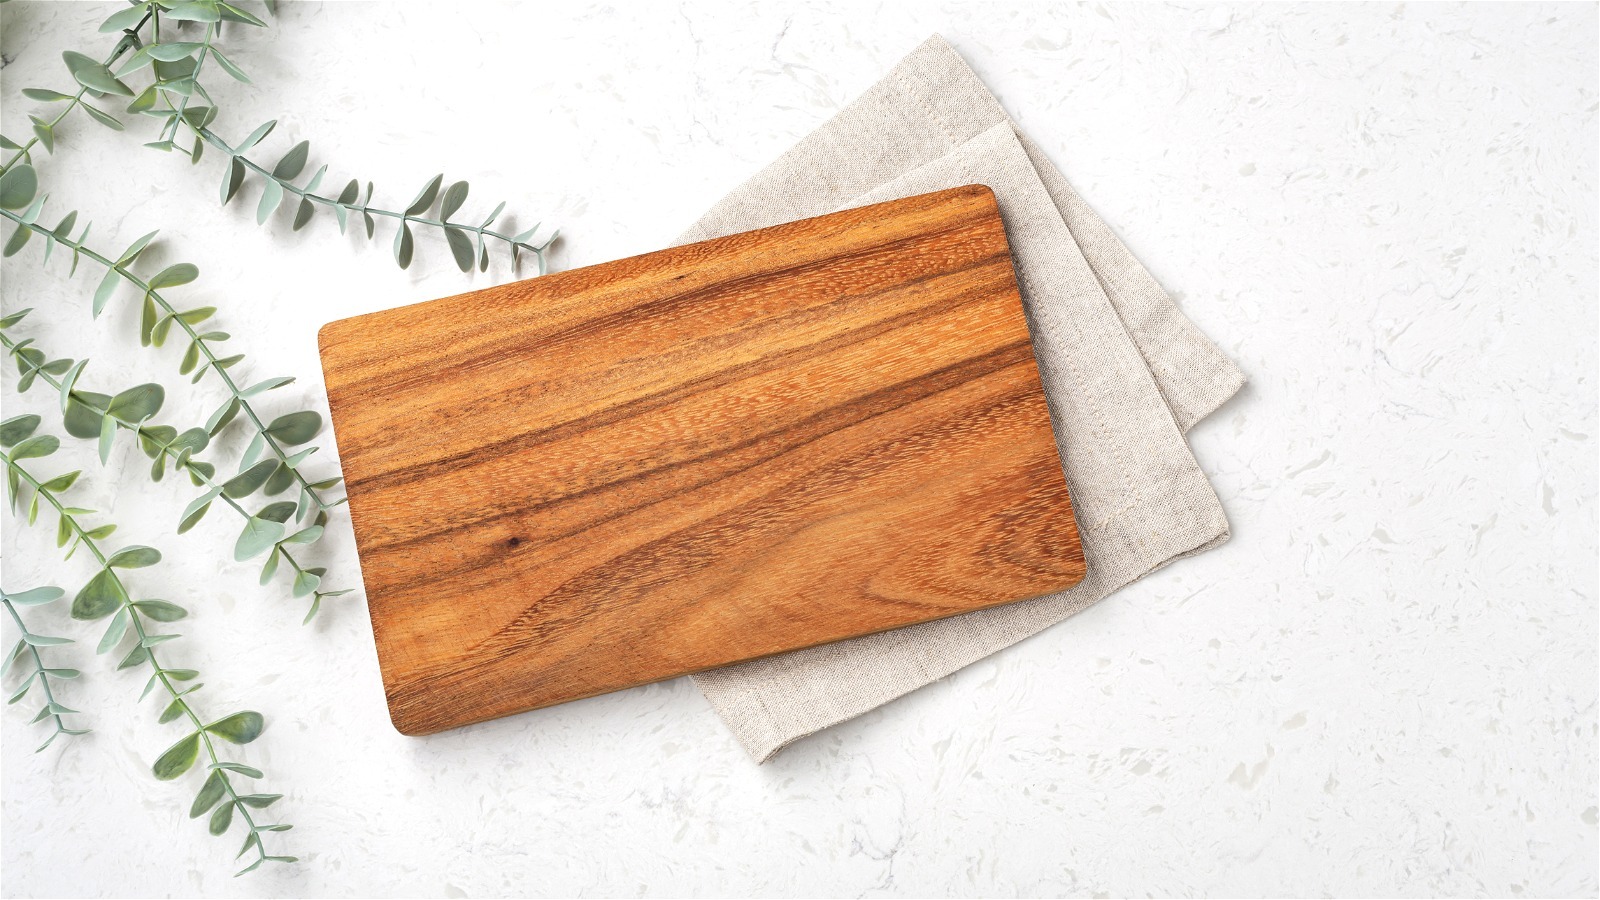 Why It's Essential To Properly Dry Your Bamboo Cutting Board